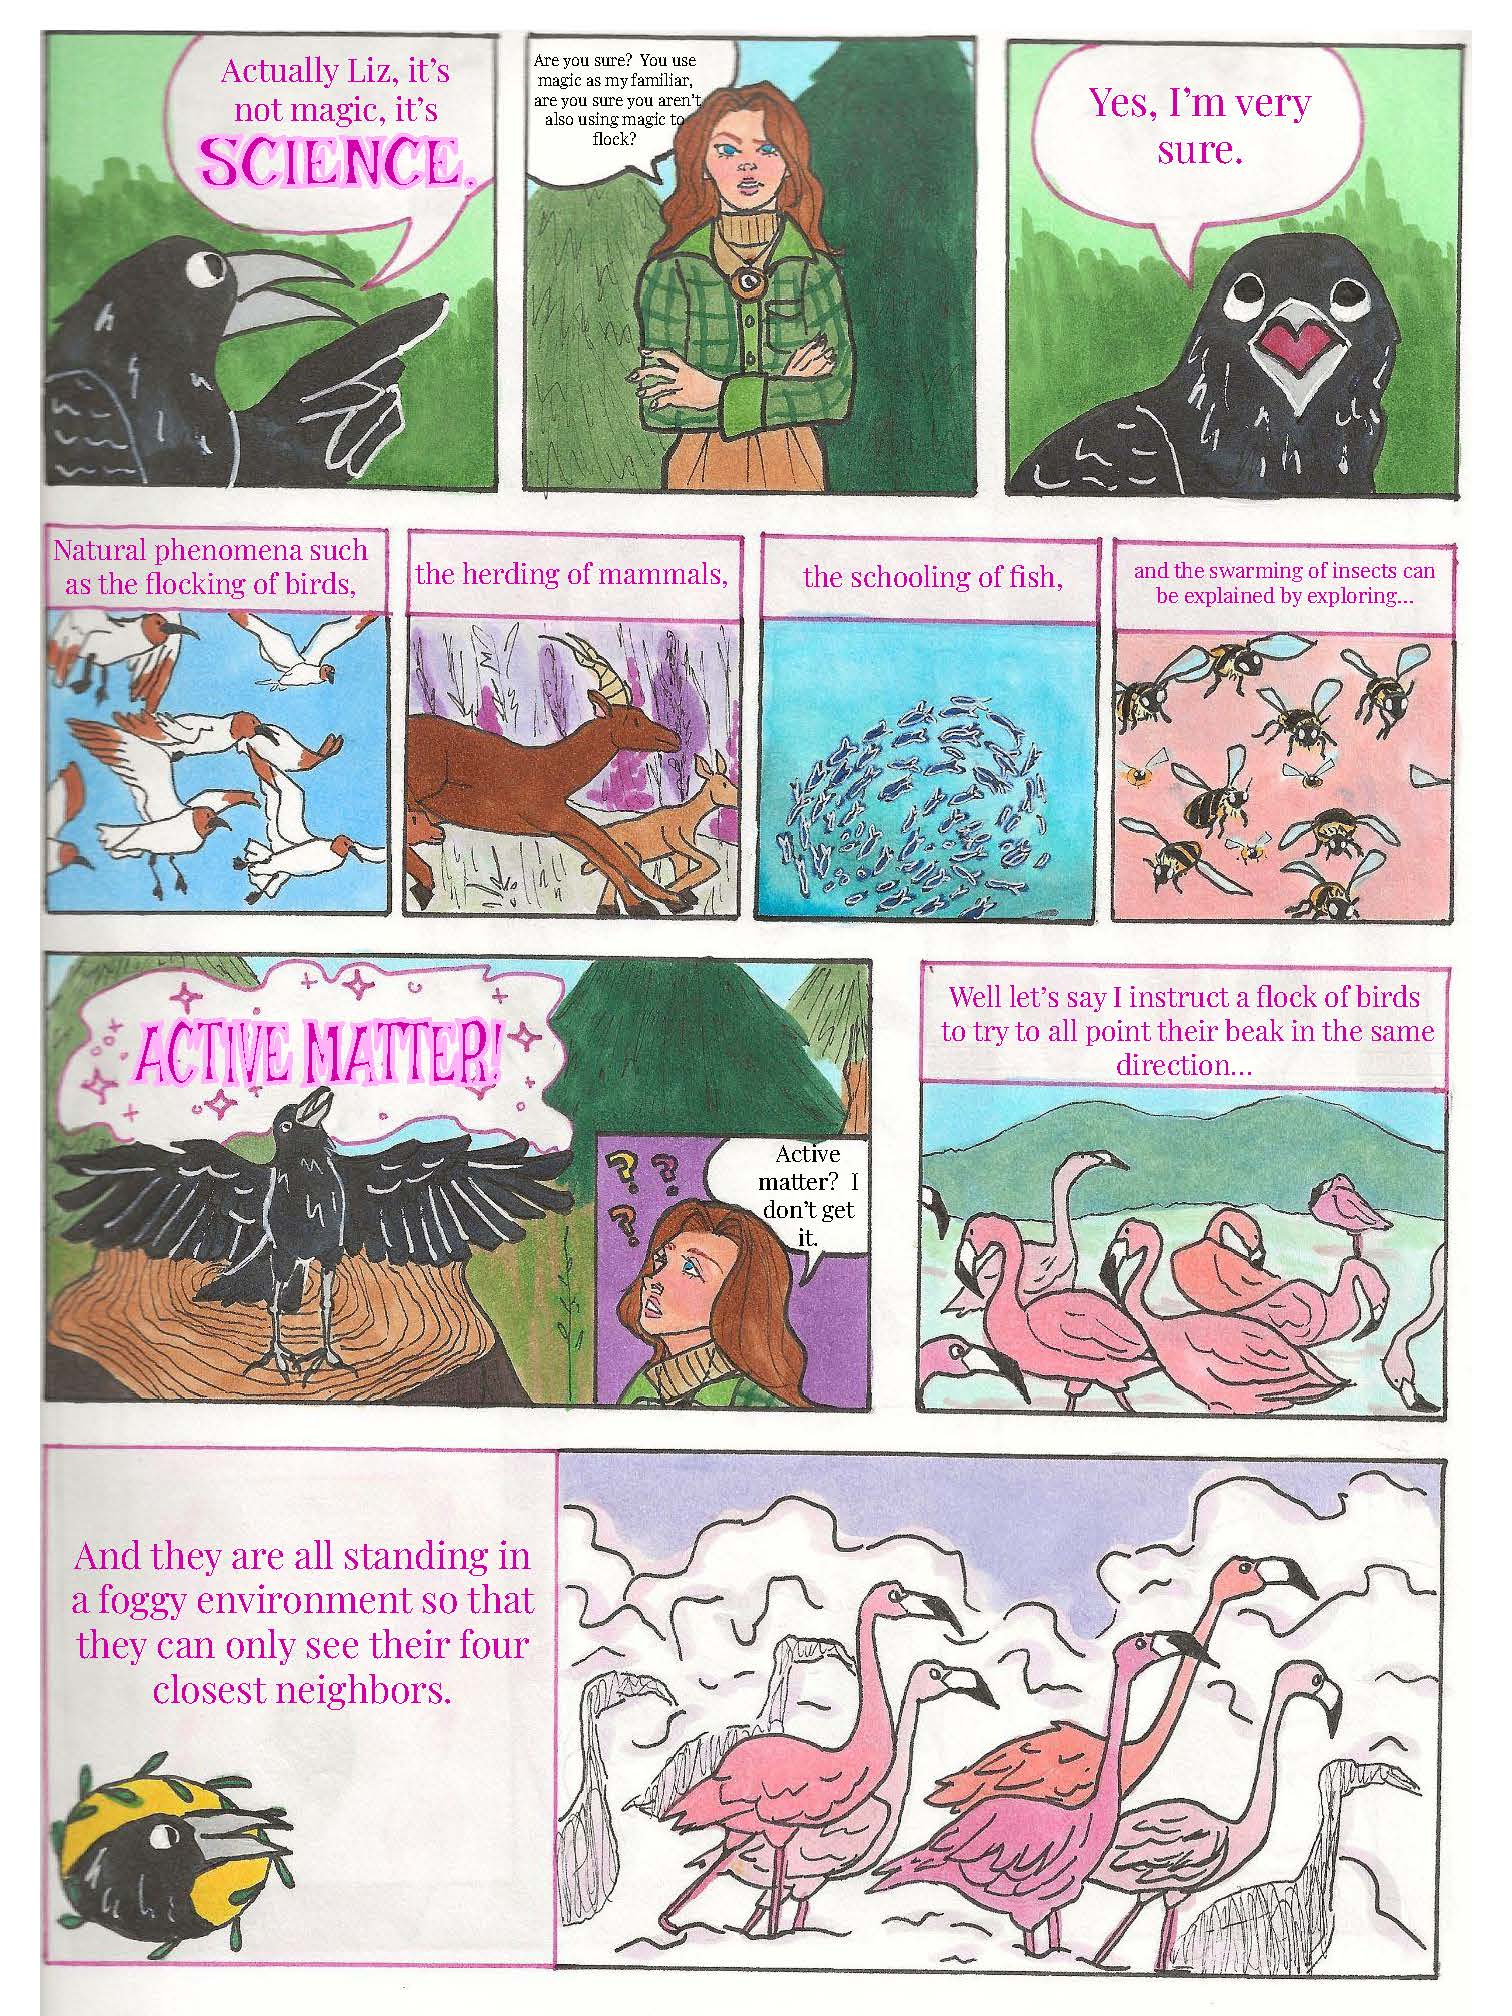 Flocking birds and active matter page 2